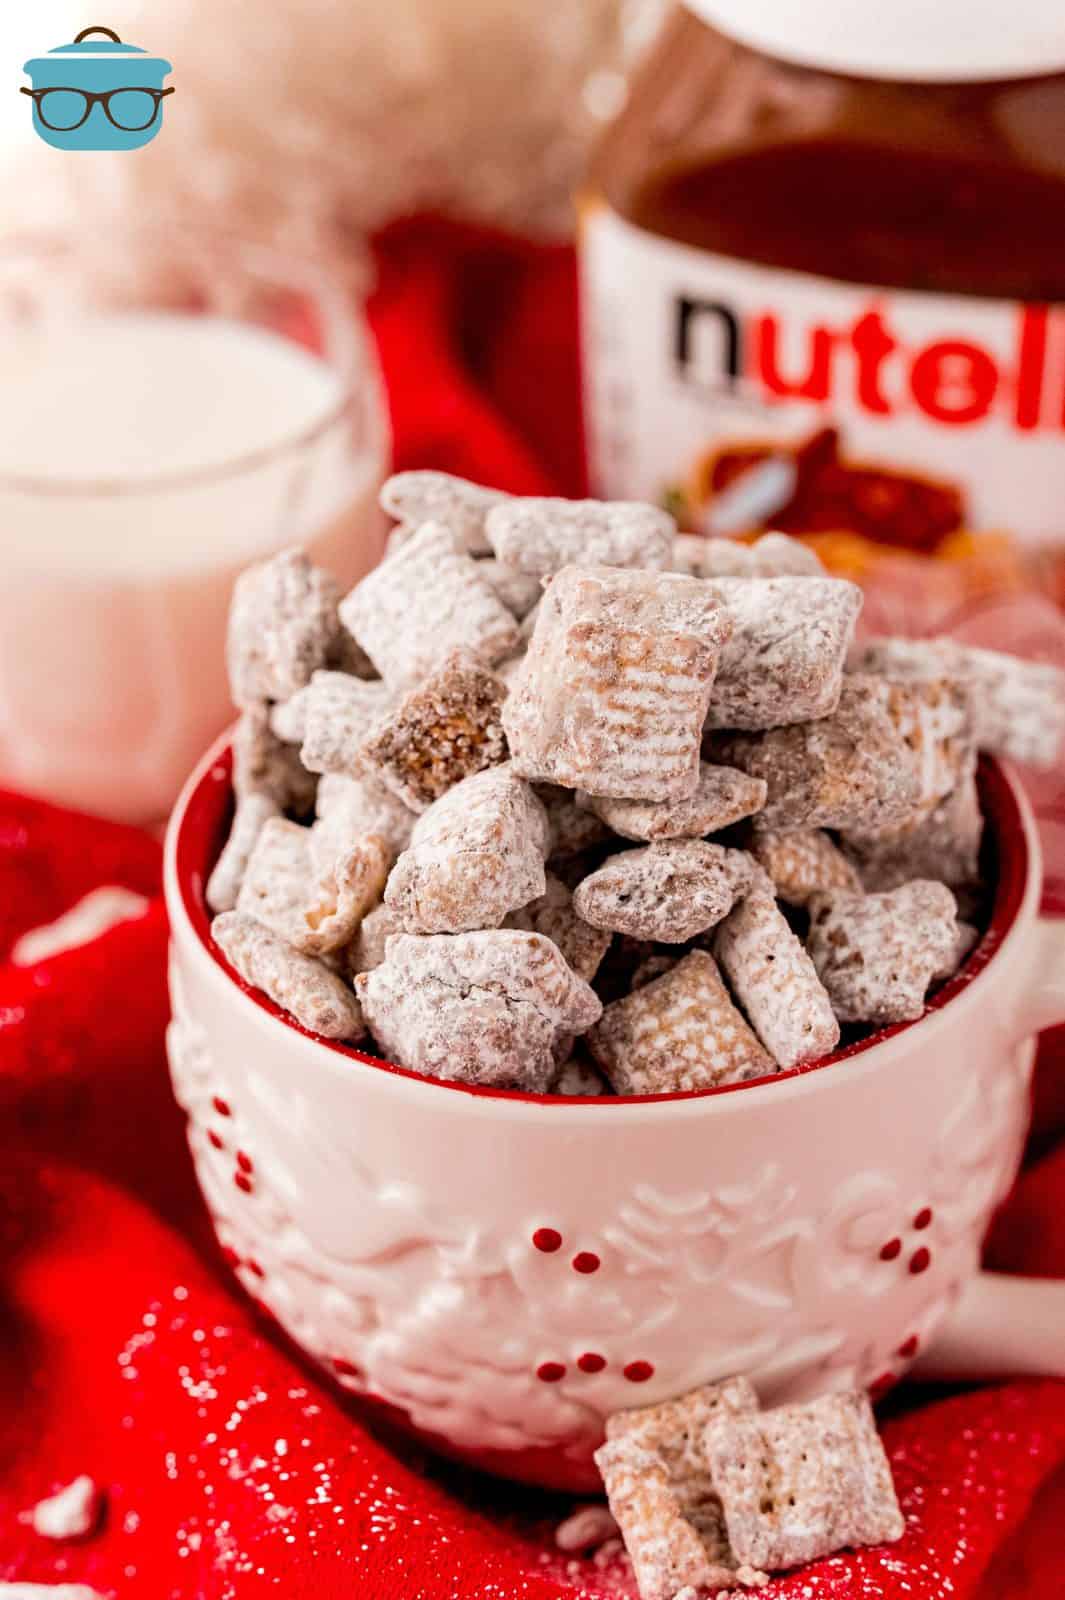 Nutella Puppy Chow in pink mug with Nutella container in background.